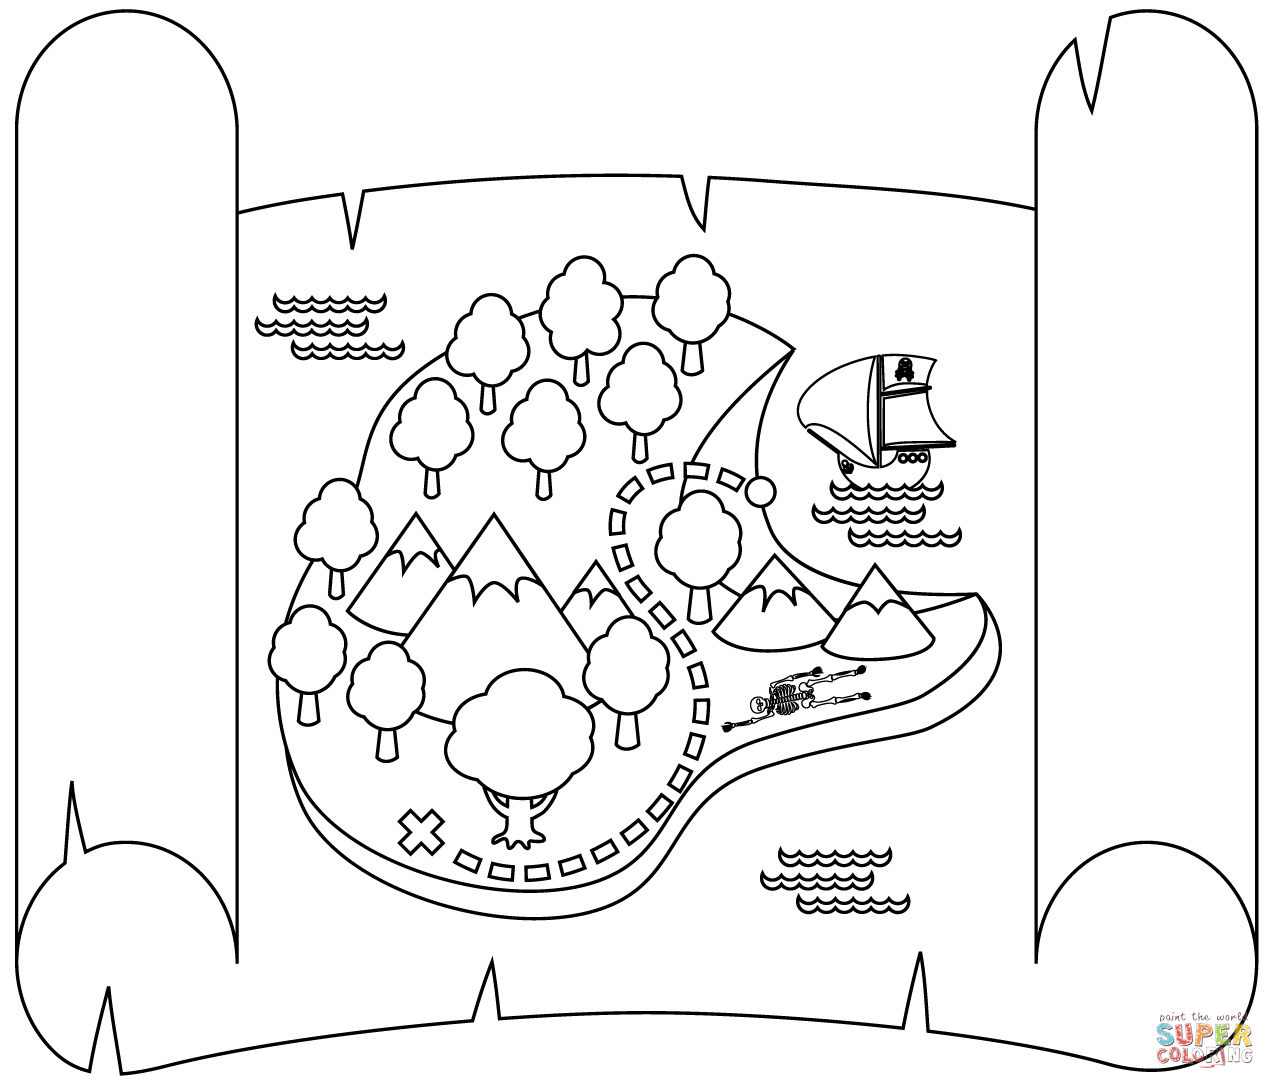 Treasure map coloring page free printable coloring pages